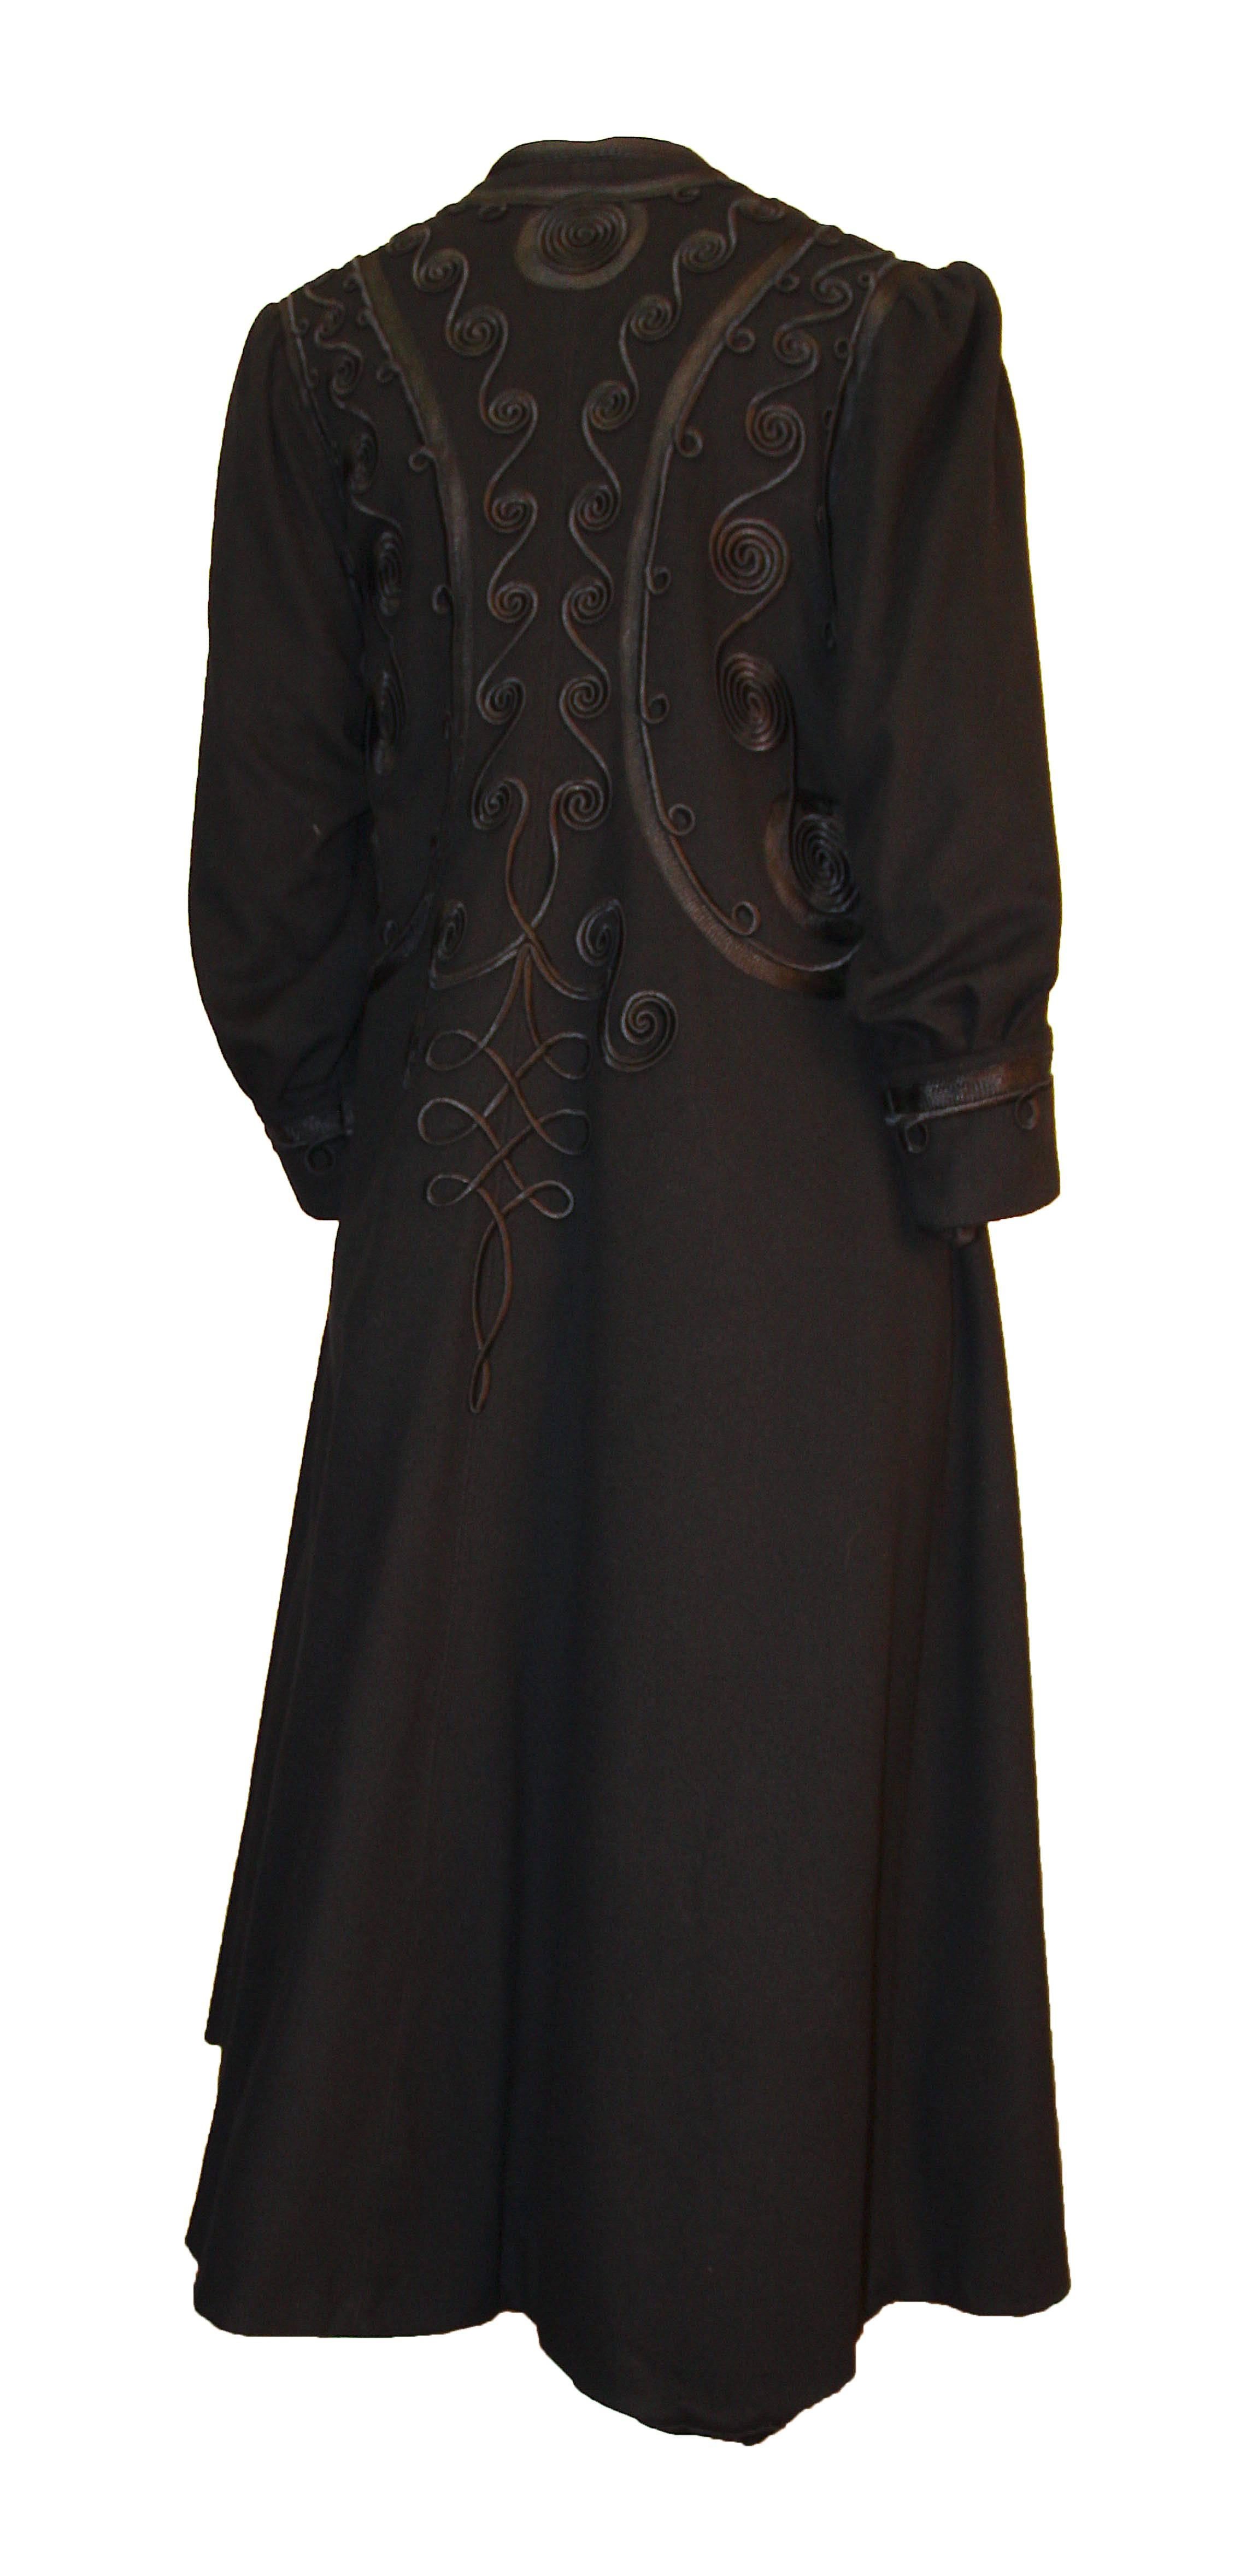 Edwardian black coat with elaborate silk trim throughout body and on cuffs. Slightly gathered at the shoulder. Buttons up the front. Fully lined in black silk.  